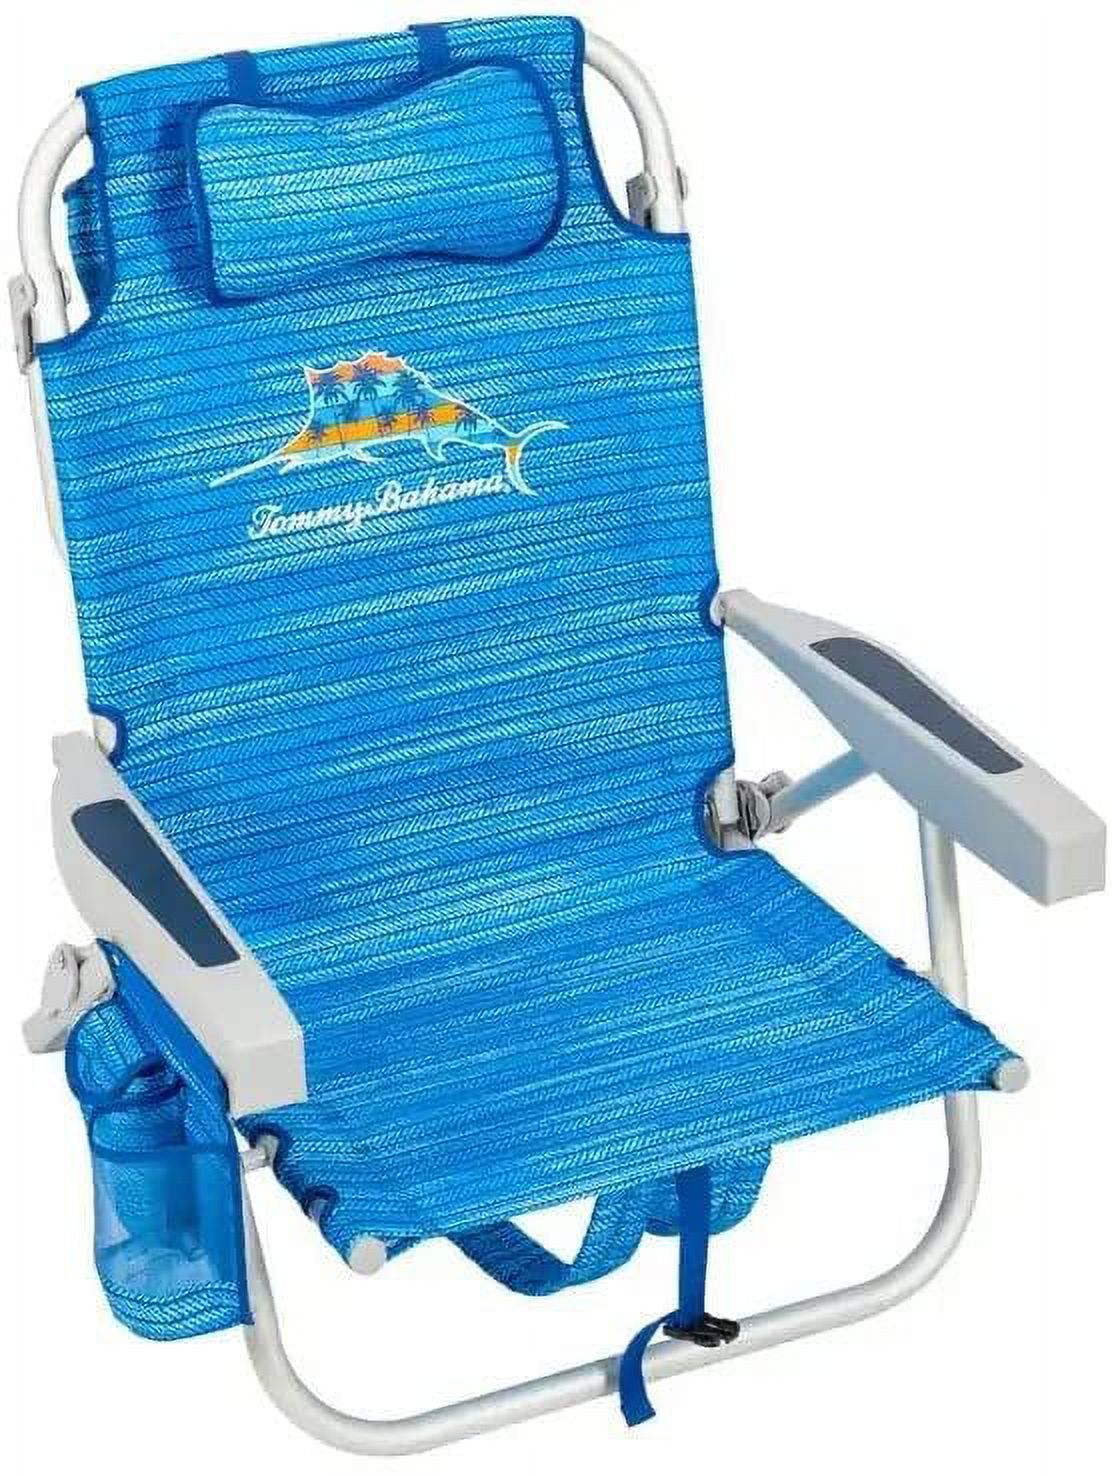 Tommy Bahama Backpack Beach Chair-New 2022 Designs-5-Position Classic Lay Flat-Insulated Cooler Towel Bar-Storage Pouch Sailfish and Palms - image 3 of 6